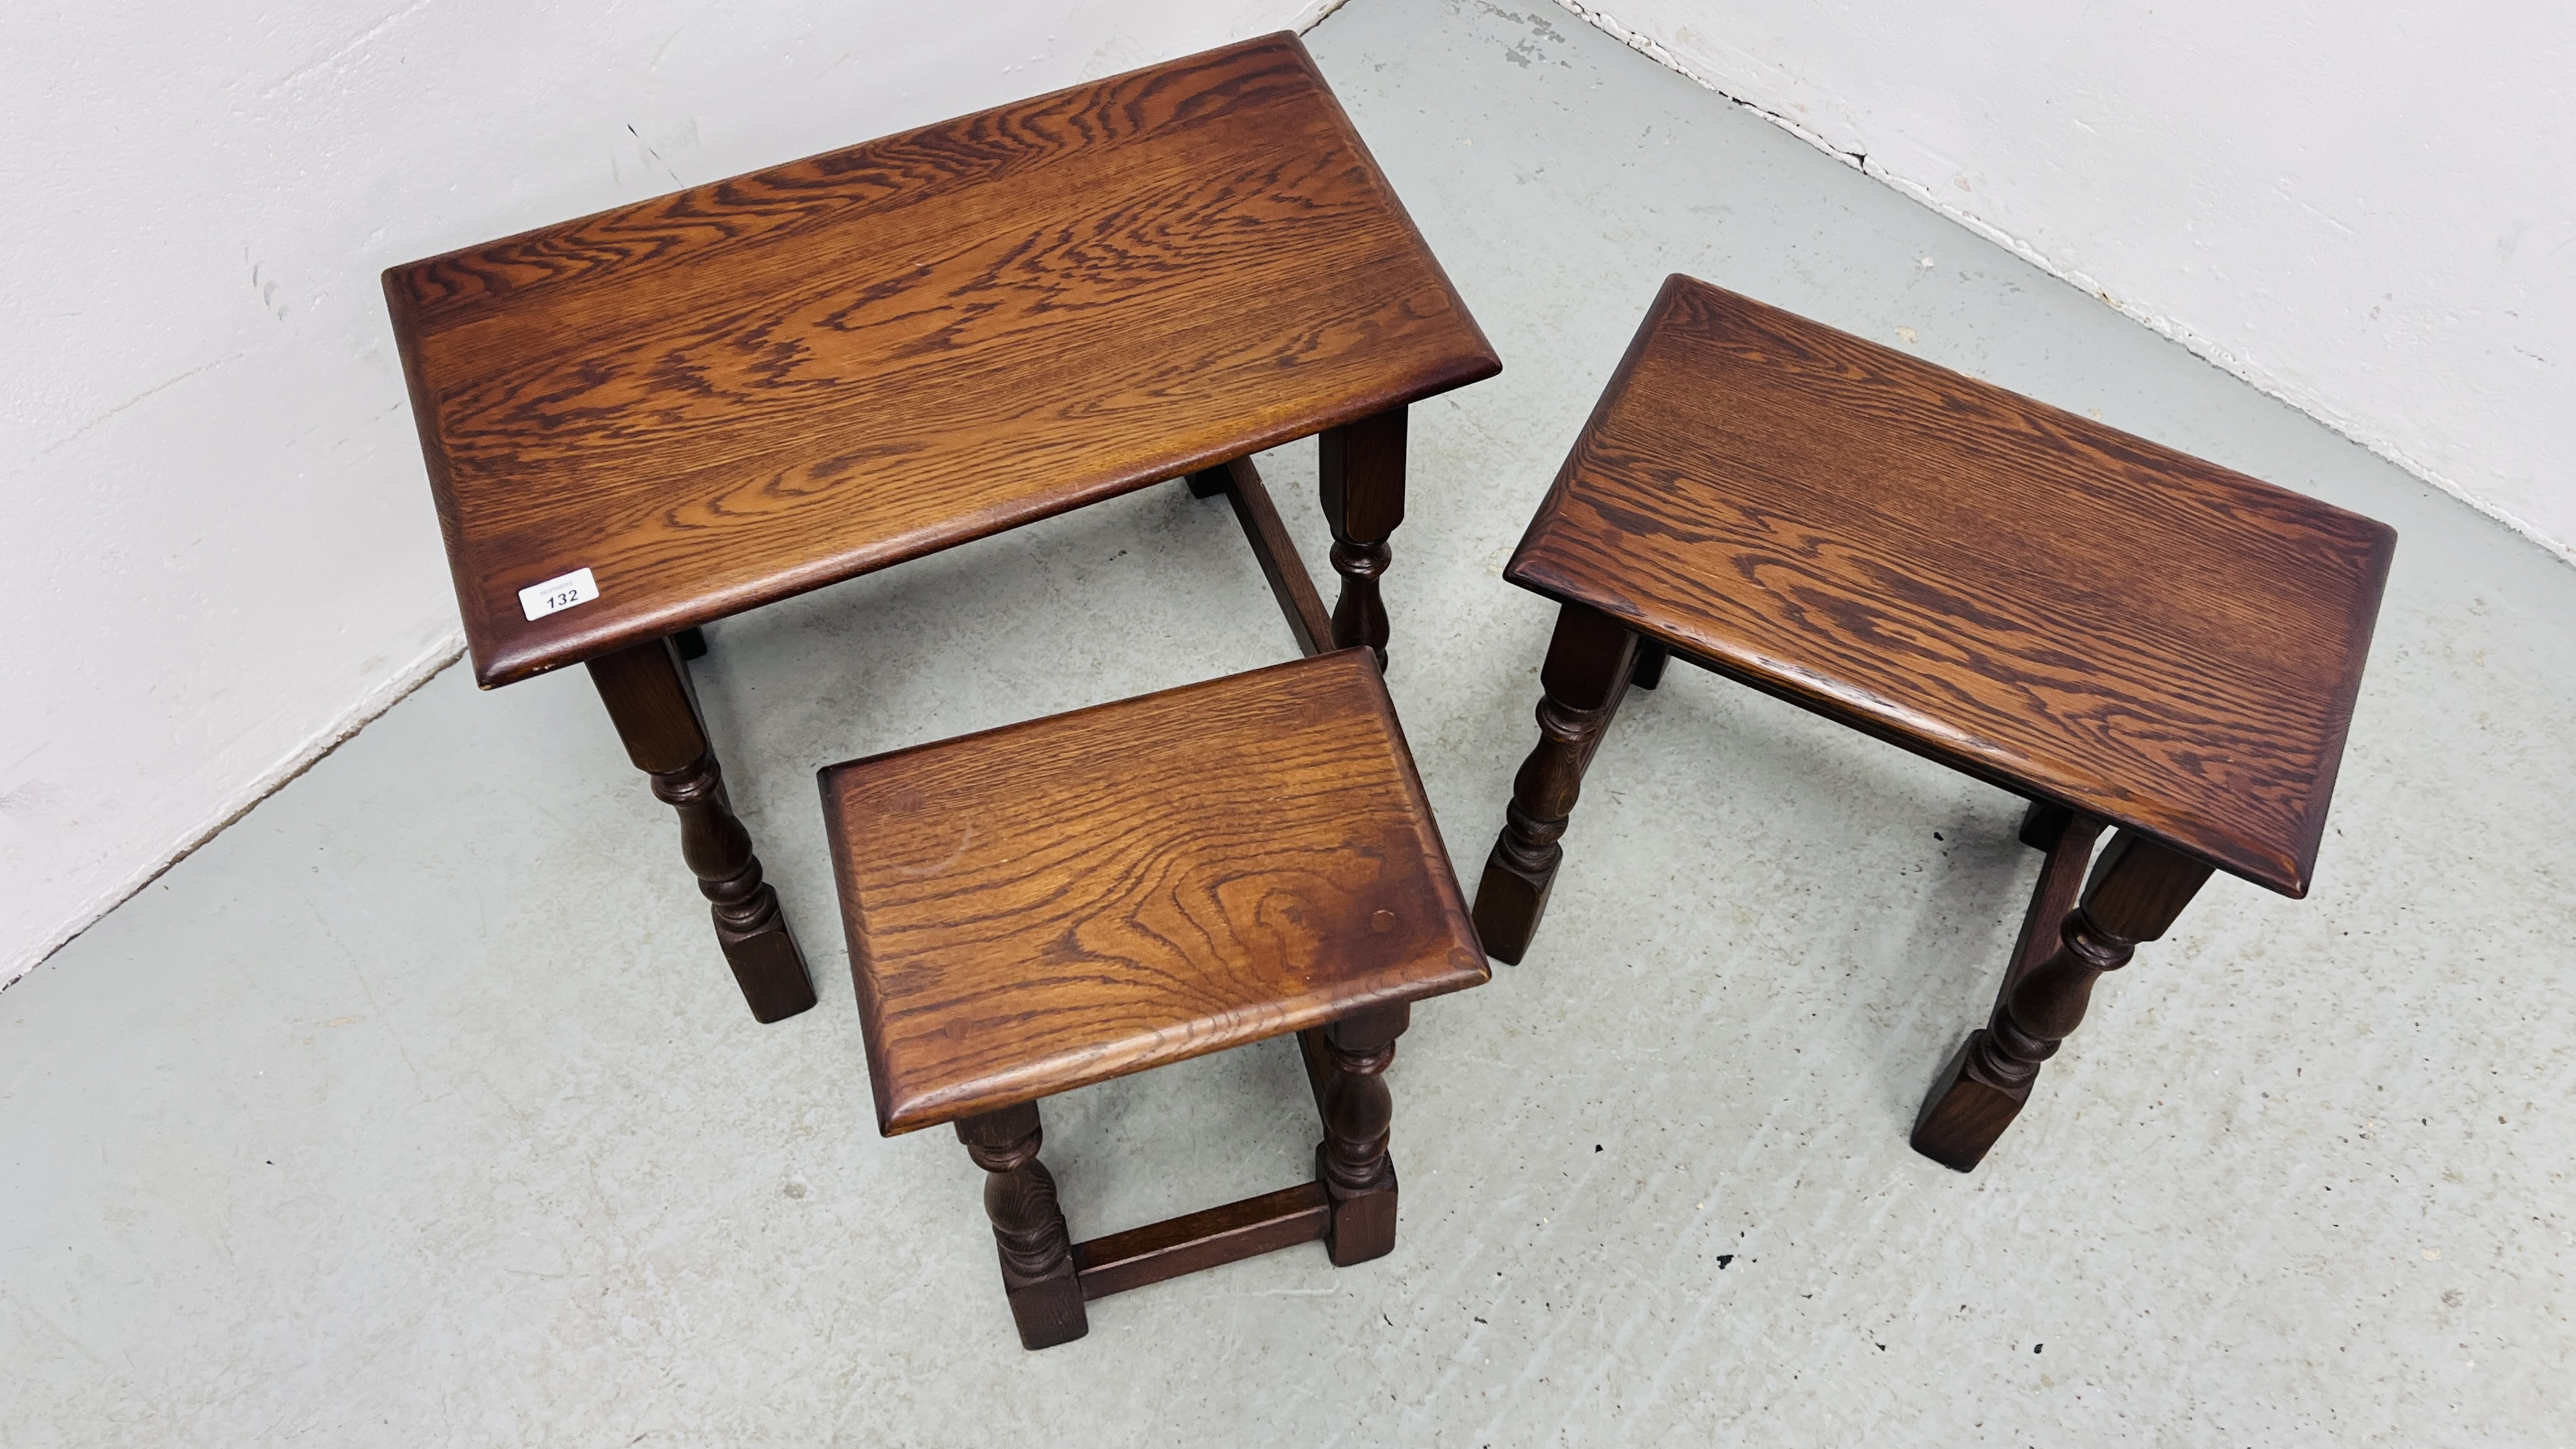 A NEST OF THREE REPRODUCTION GOOD QUALITY OAK TABLES (THE LARGEST 60CM. X 32CM. - Image 8 of 8